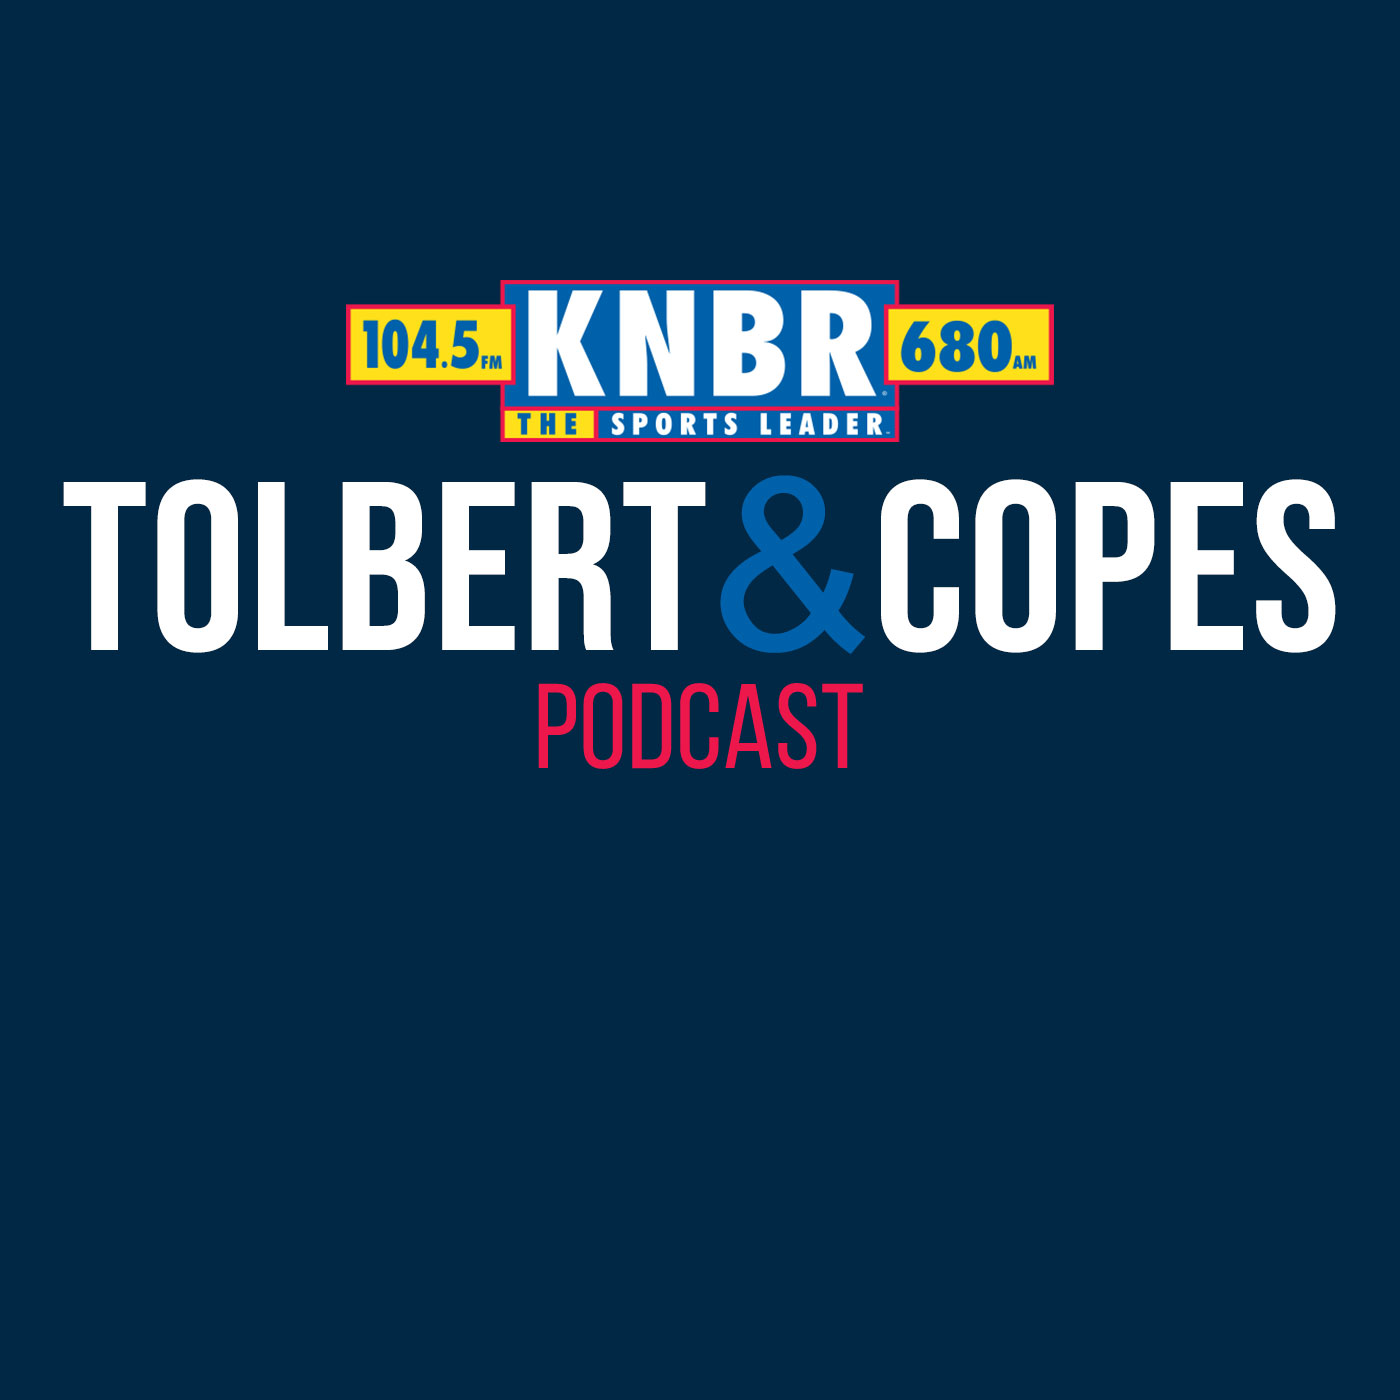 11-27 Tolbert & Copes discuss if the only thing stopping the 49ers are injuries or the Eagles after their Thanksgiving win in Seattle